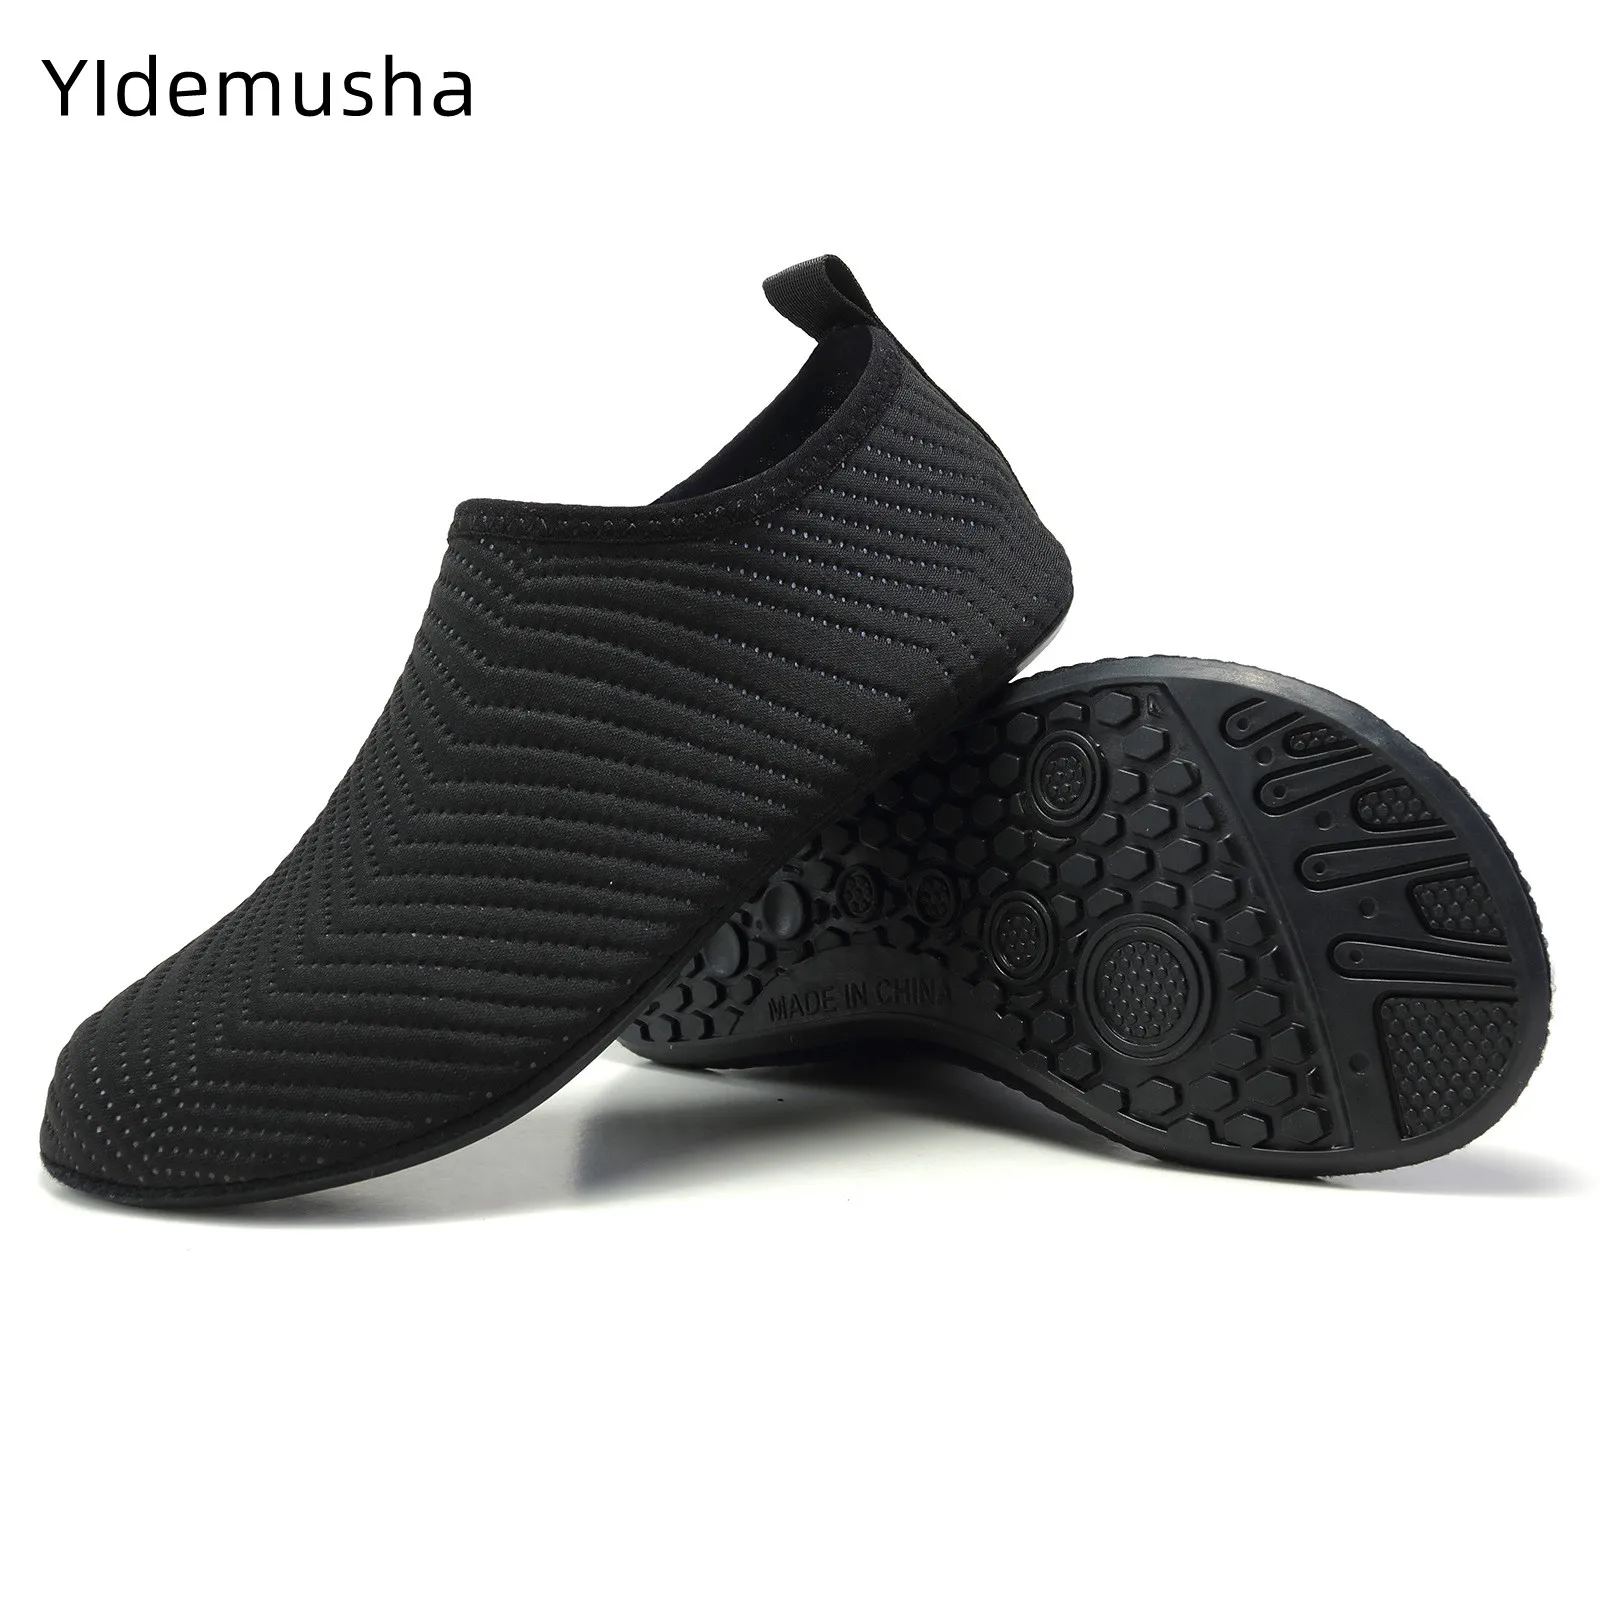 

2022 Unisex Shoes Swimming Large Size 48 49 Seaside Shoes Water Shoes Outdoor Surfing Wading Beach Sandals Fitness Yoga Shoes